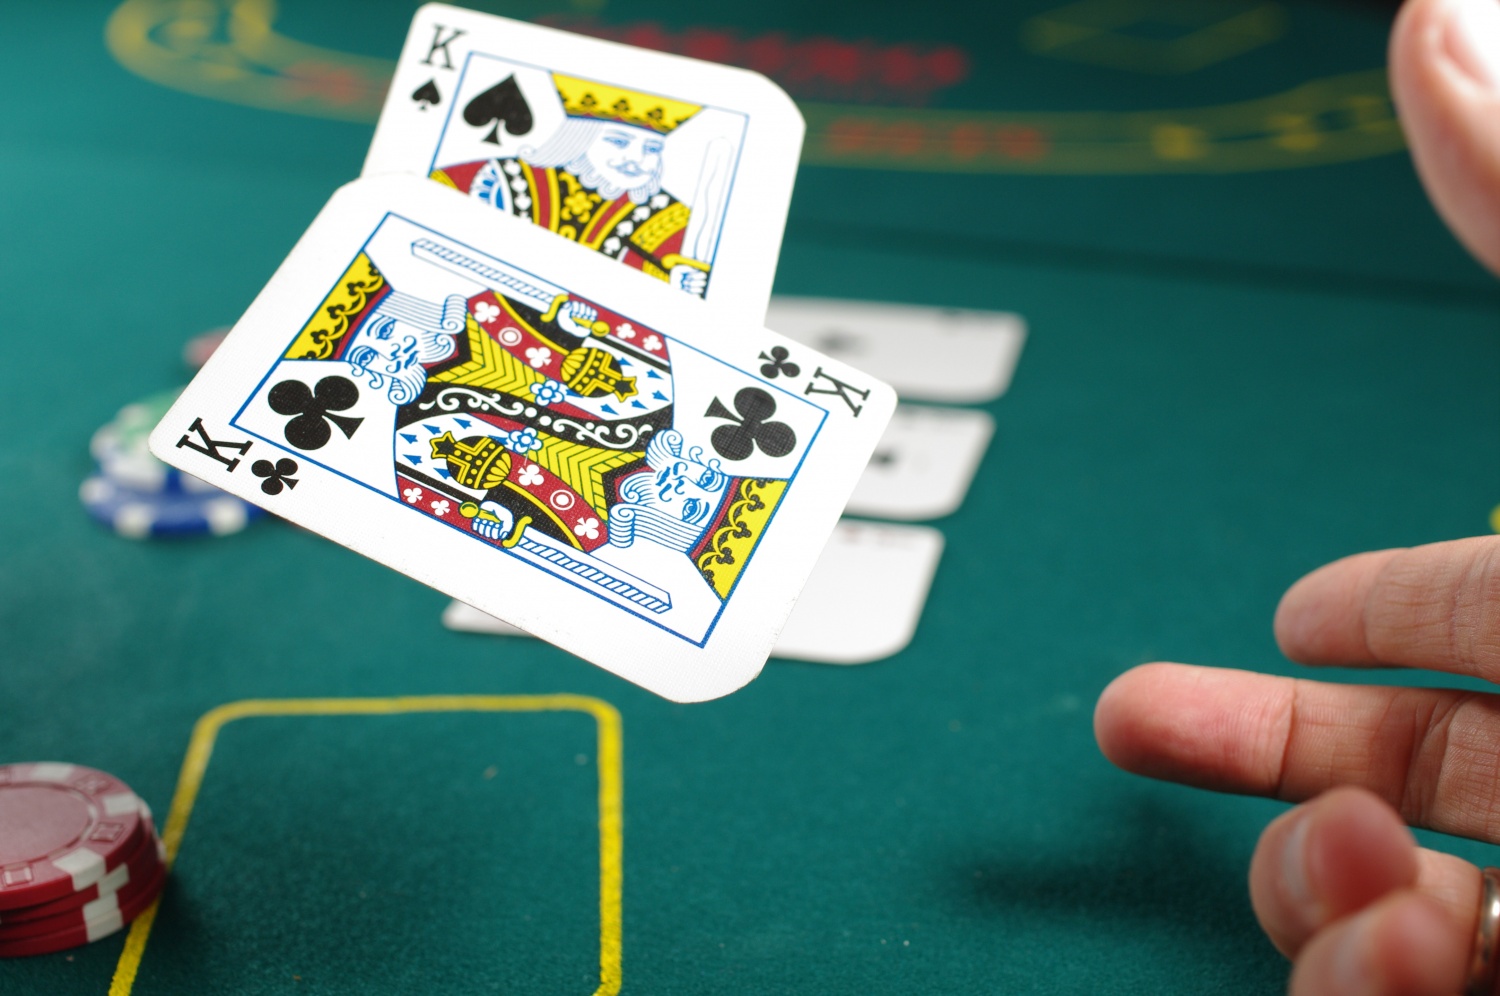 Are online casinos available in multiple languages?